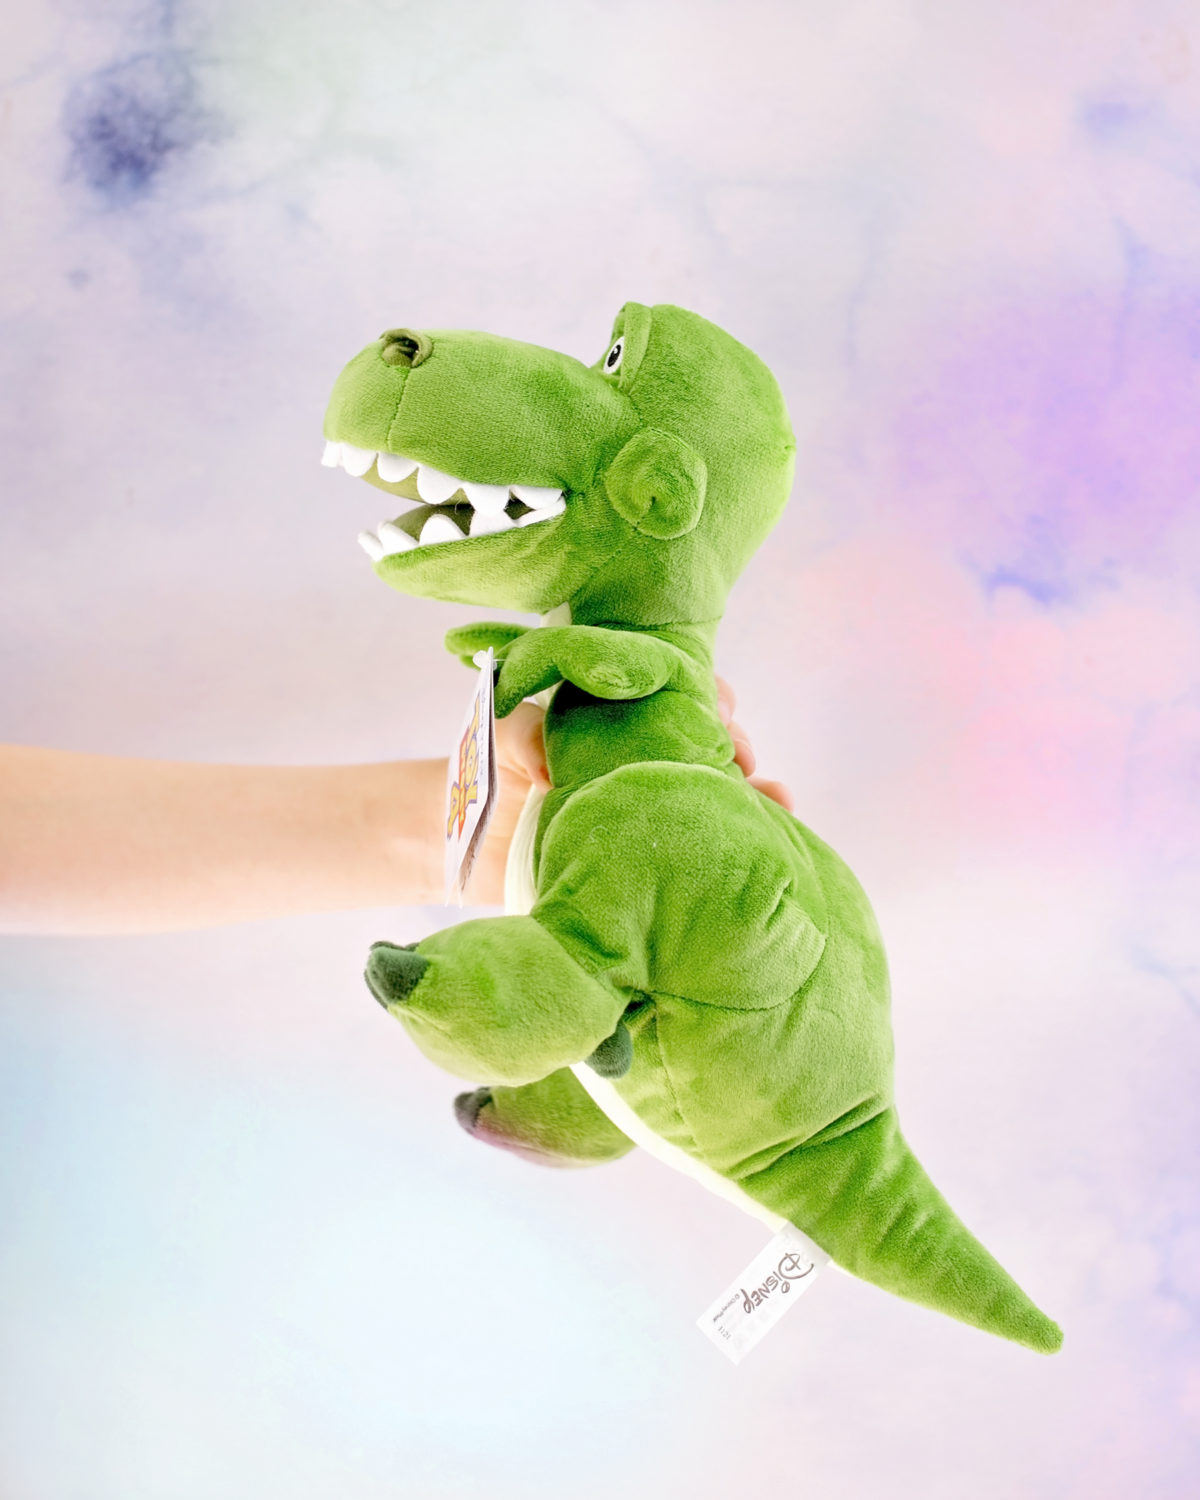 Image shows profile view of Disney Pixar's Toy Story Dinosaur, Rex as a plush toy from SImba Toys. Image by Keep Up With The Jones Family. 